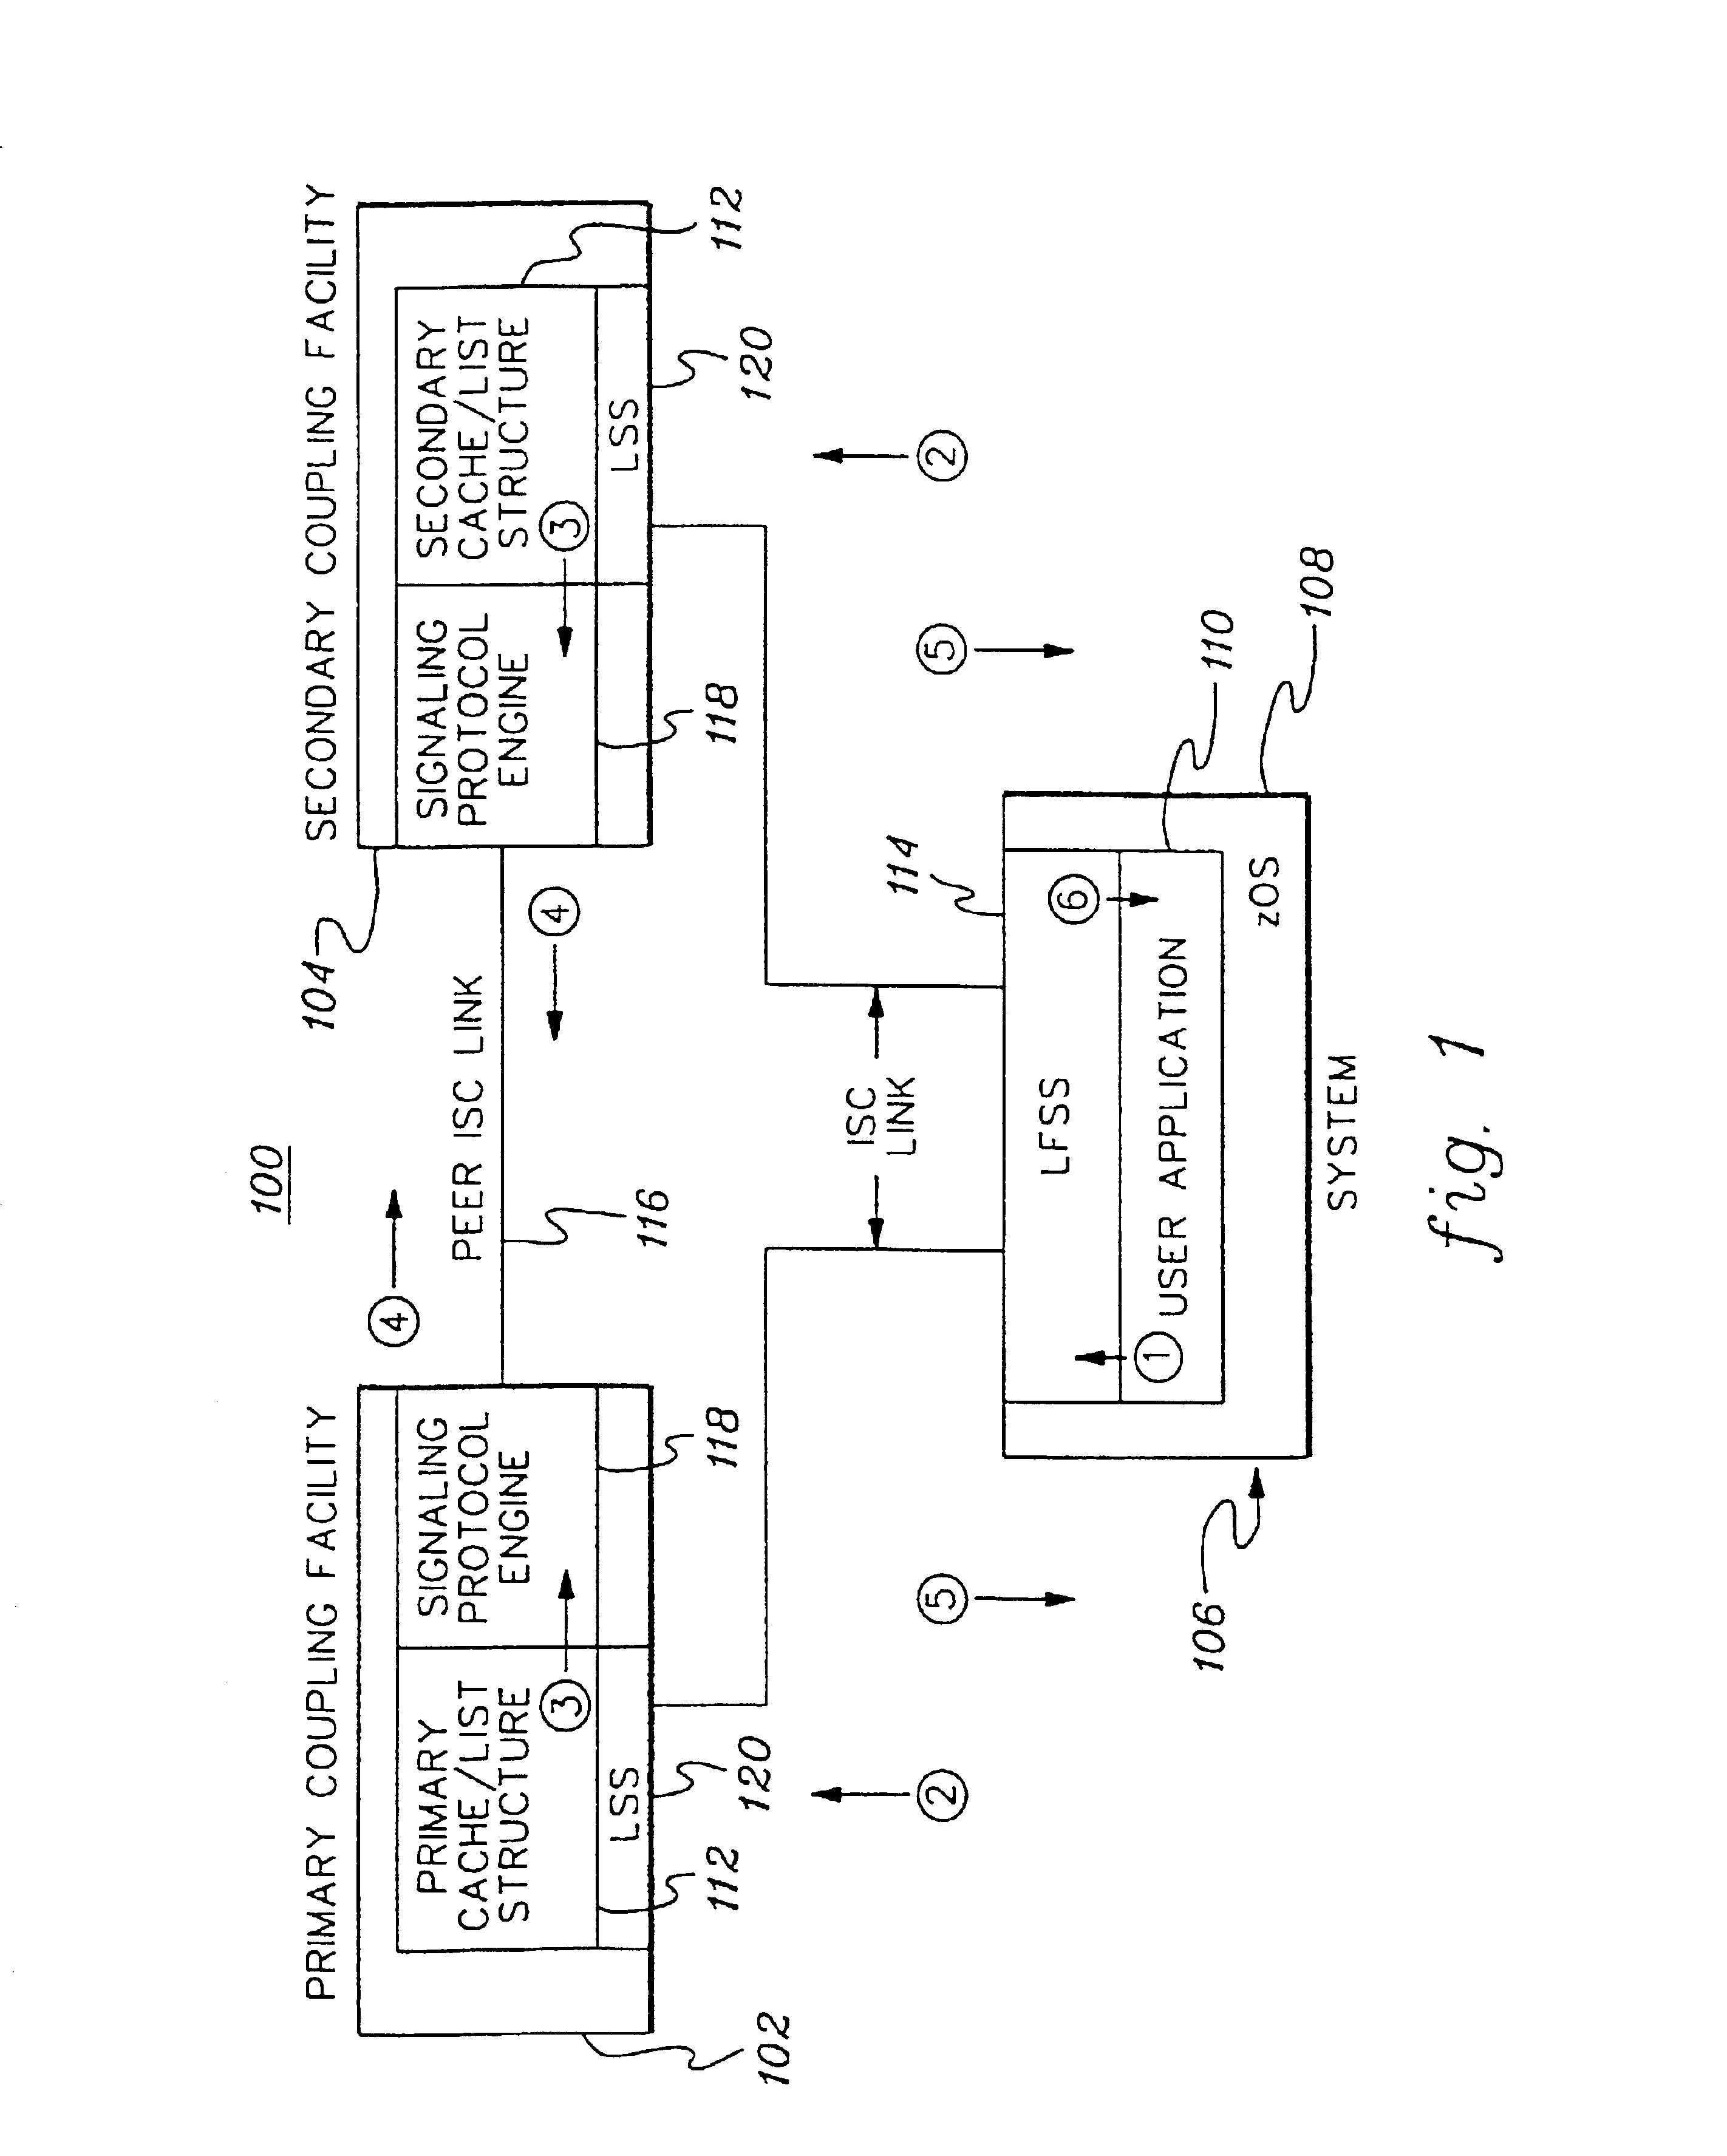 Managing connections to coupling facility structures